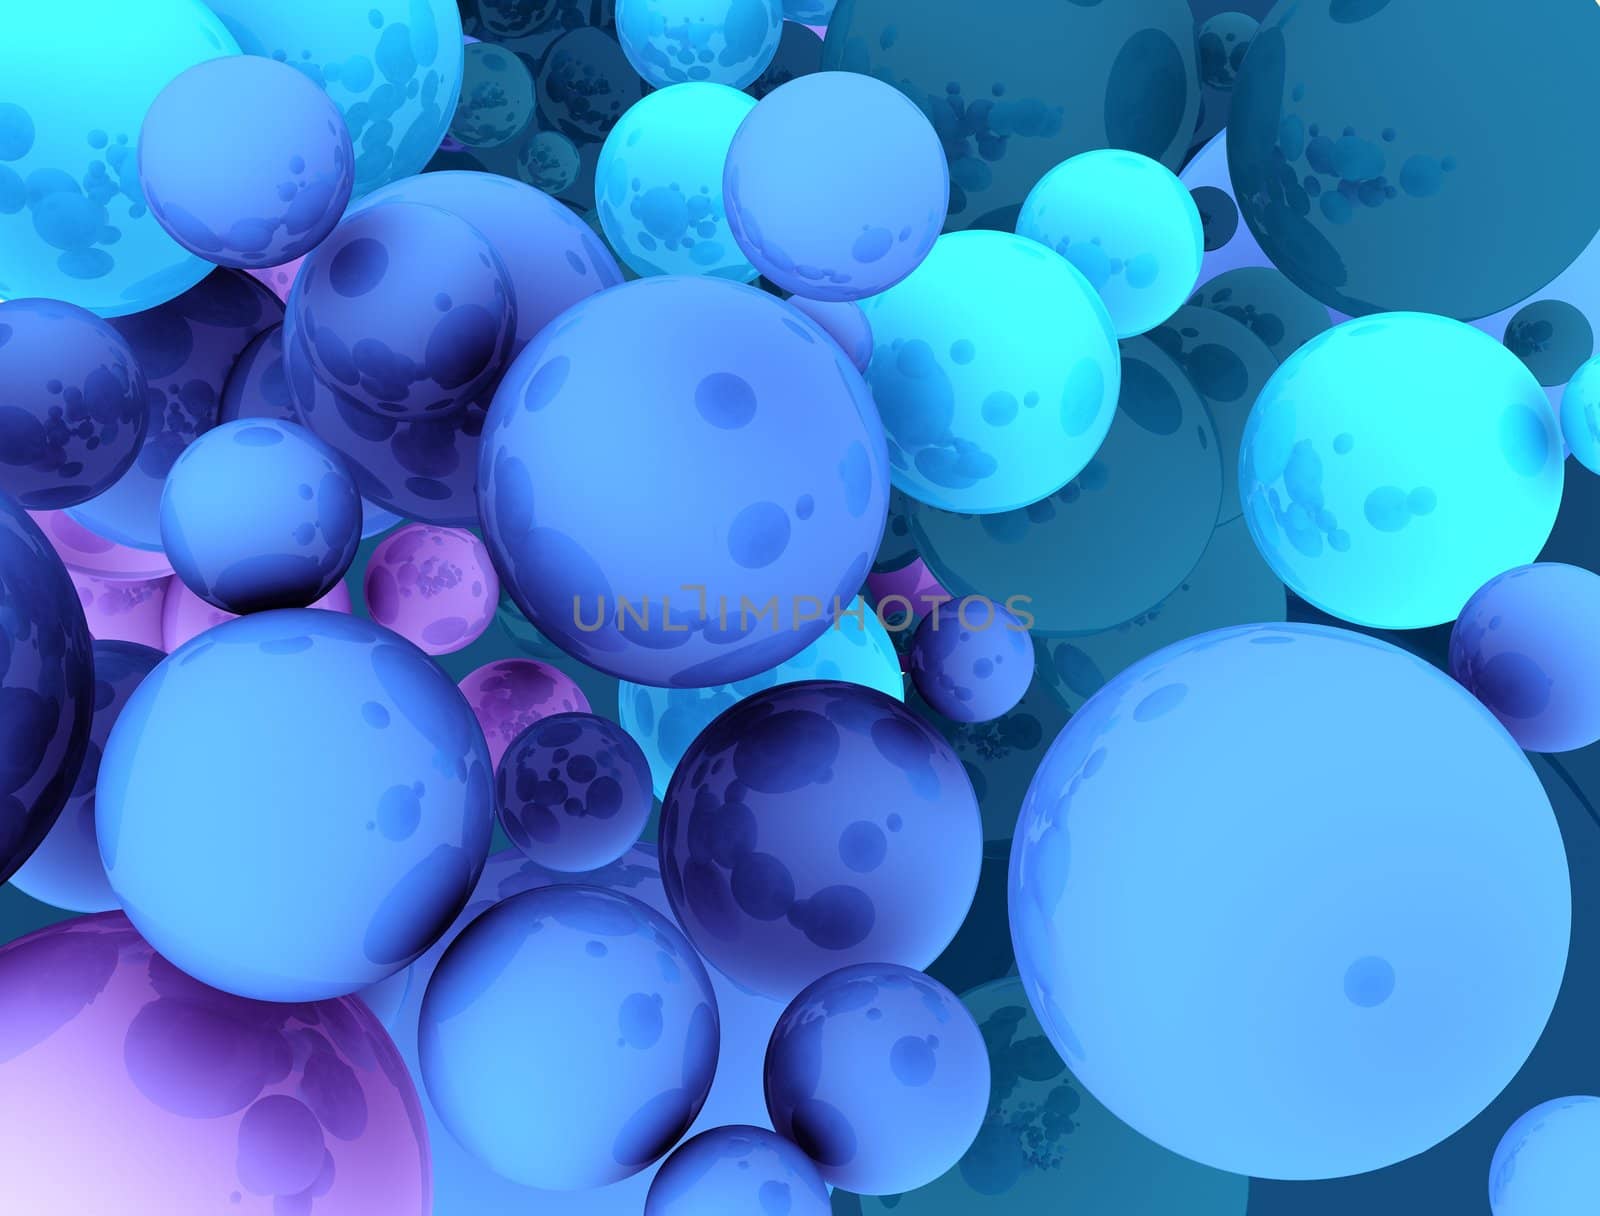 Conceptual abstract background consisting of spheres fulfilling whole area of view. Concept is rendered with slight reflections. Spheres are portrayed in various sizes and blue with violet color variations.